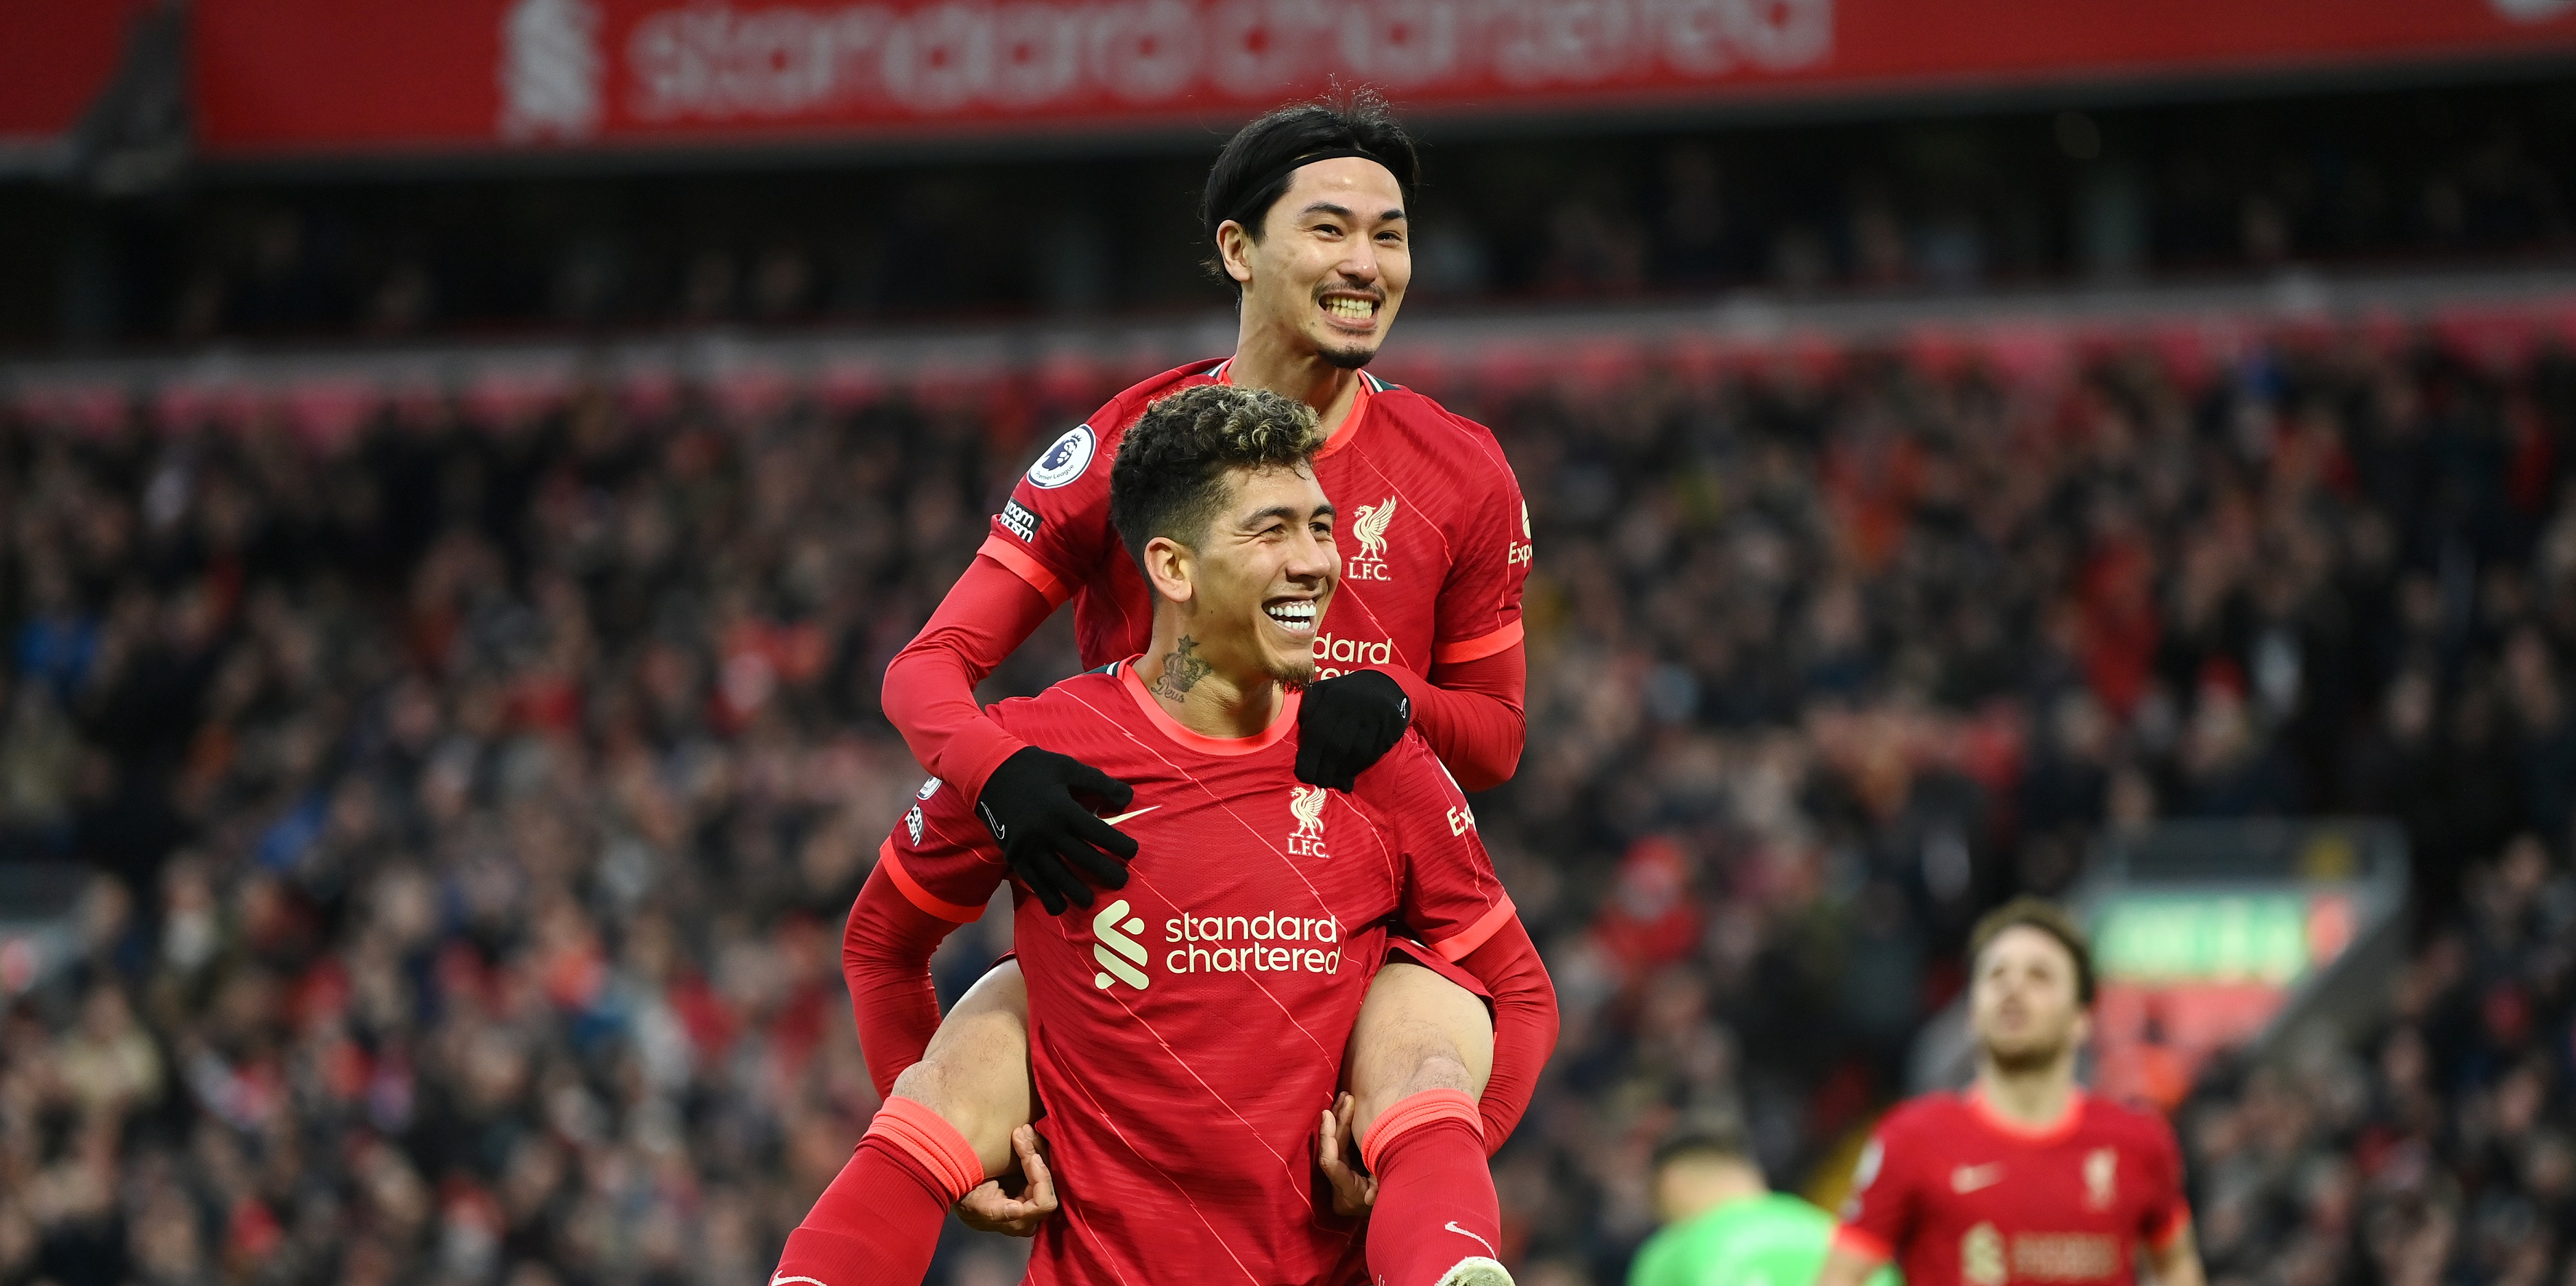 Former Manchester United midfielder claims Bobby Firmino ‘can help’ the Old Trafford outfit as Brazilian nears final 12 months of Liverpool contract